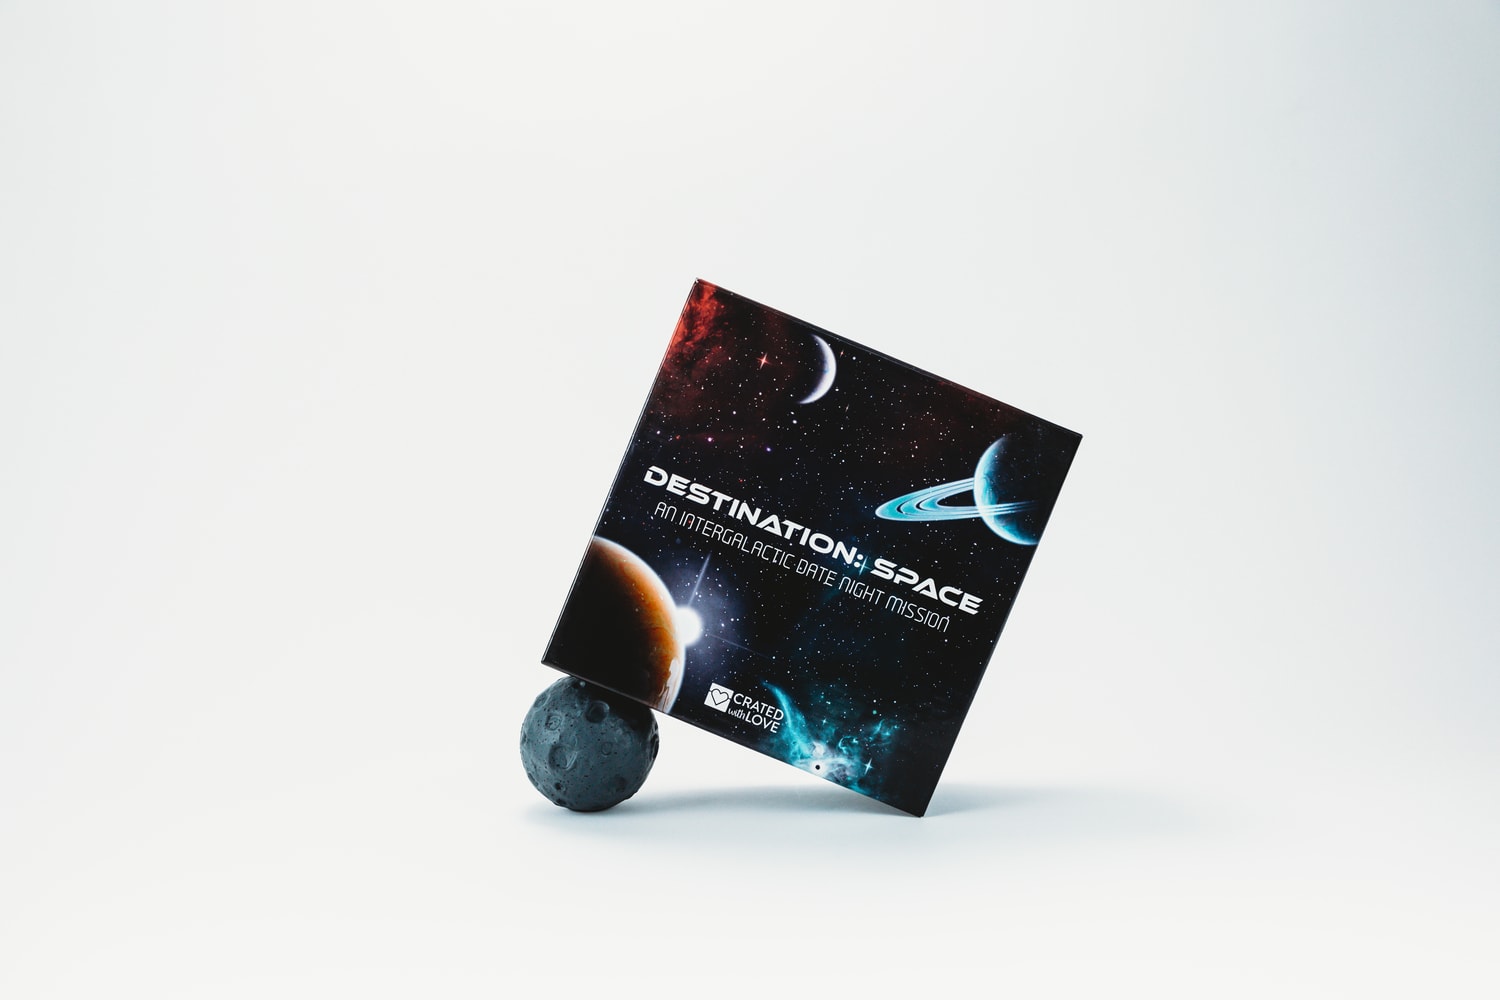 Destination: Space date box tilted on the side on asteroid stress ball